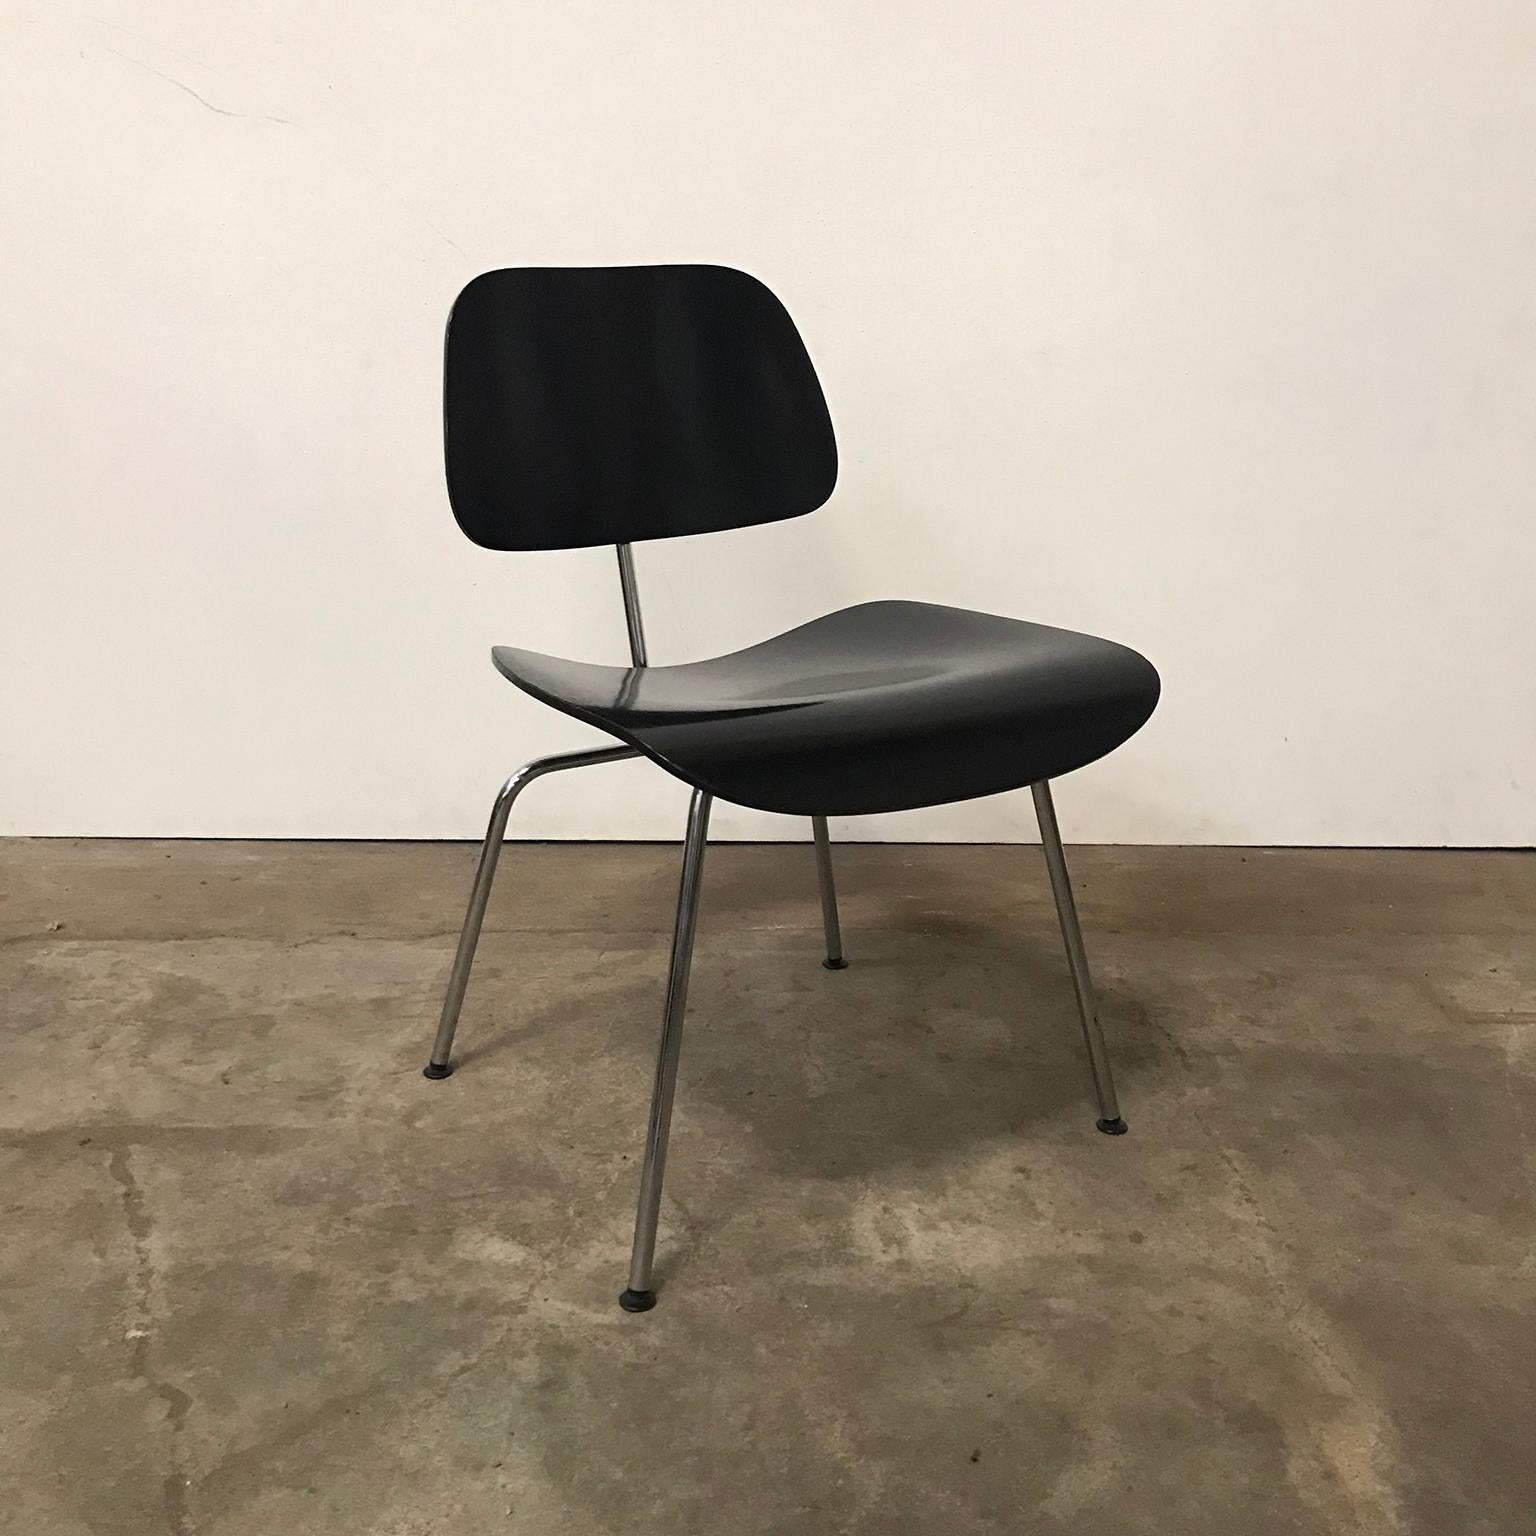 Set of six DCM in black by Vitra. Only for sale as a set. The chairs show traces of use like some scratches and some loss of paint/lacquer at some spots. The bases are in good condition. 
Also other DCM are available in black and one in red by Vitra